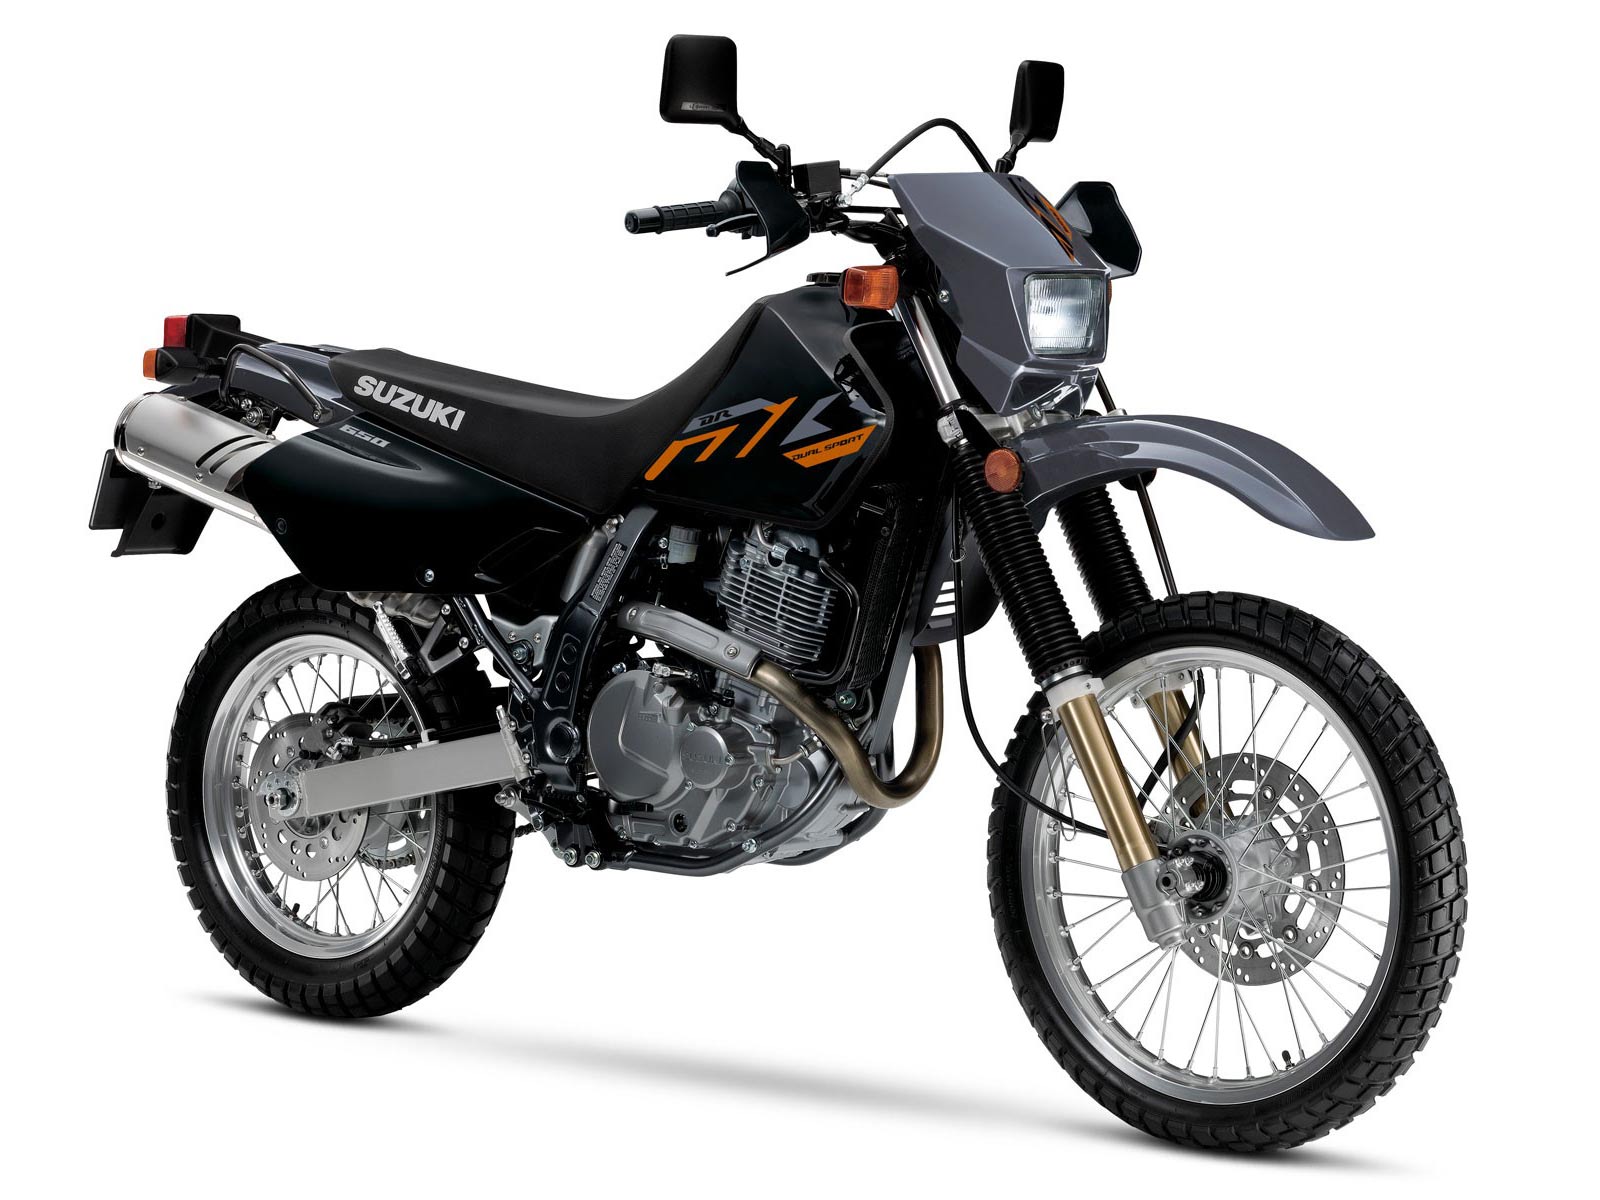 New KTM Enduro Motorcycles for sale